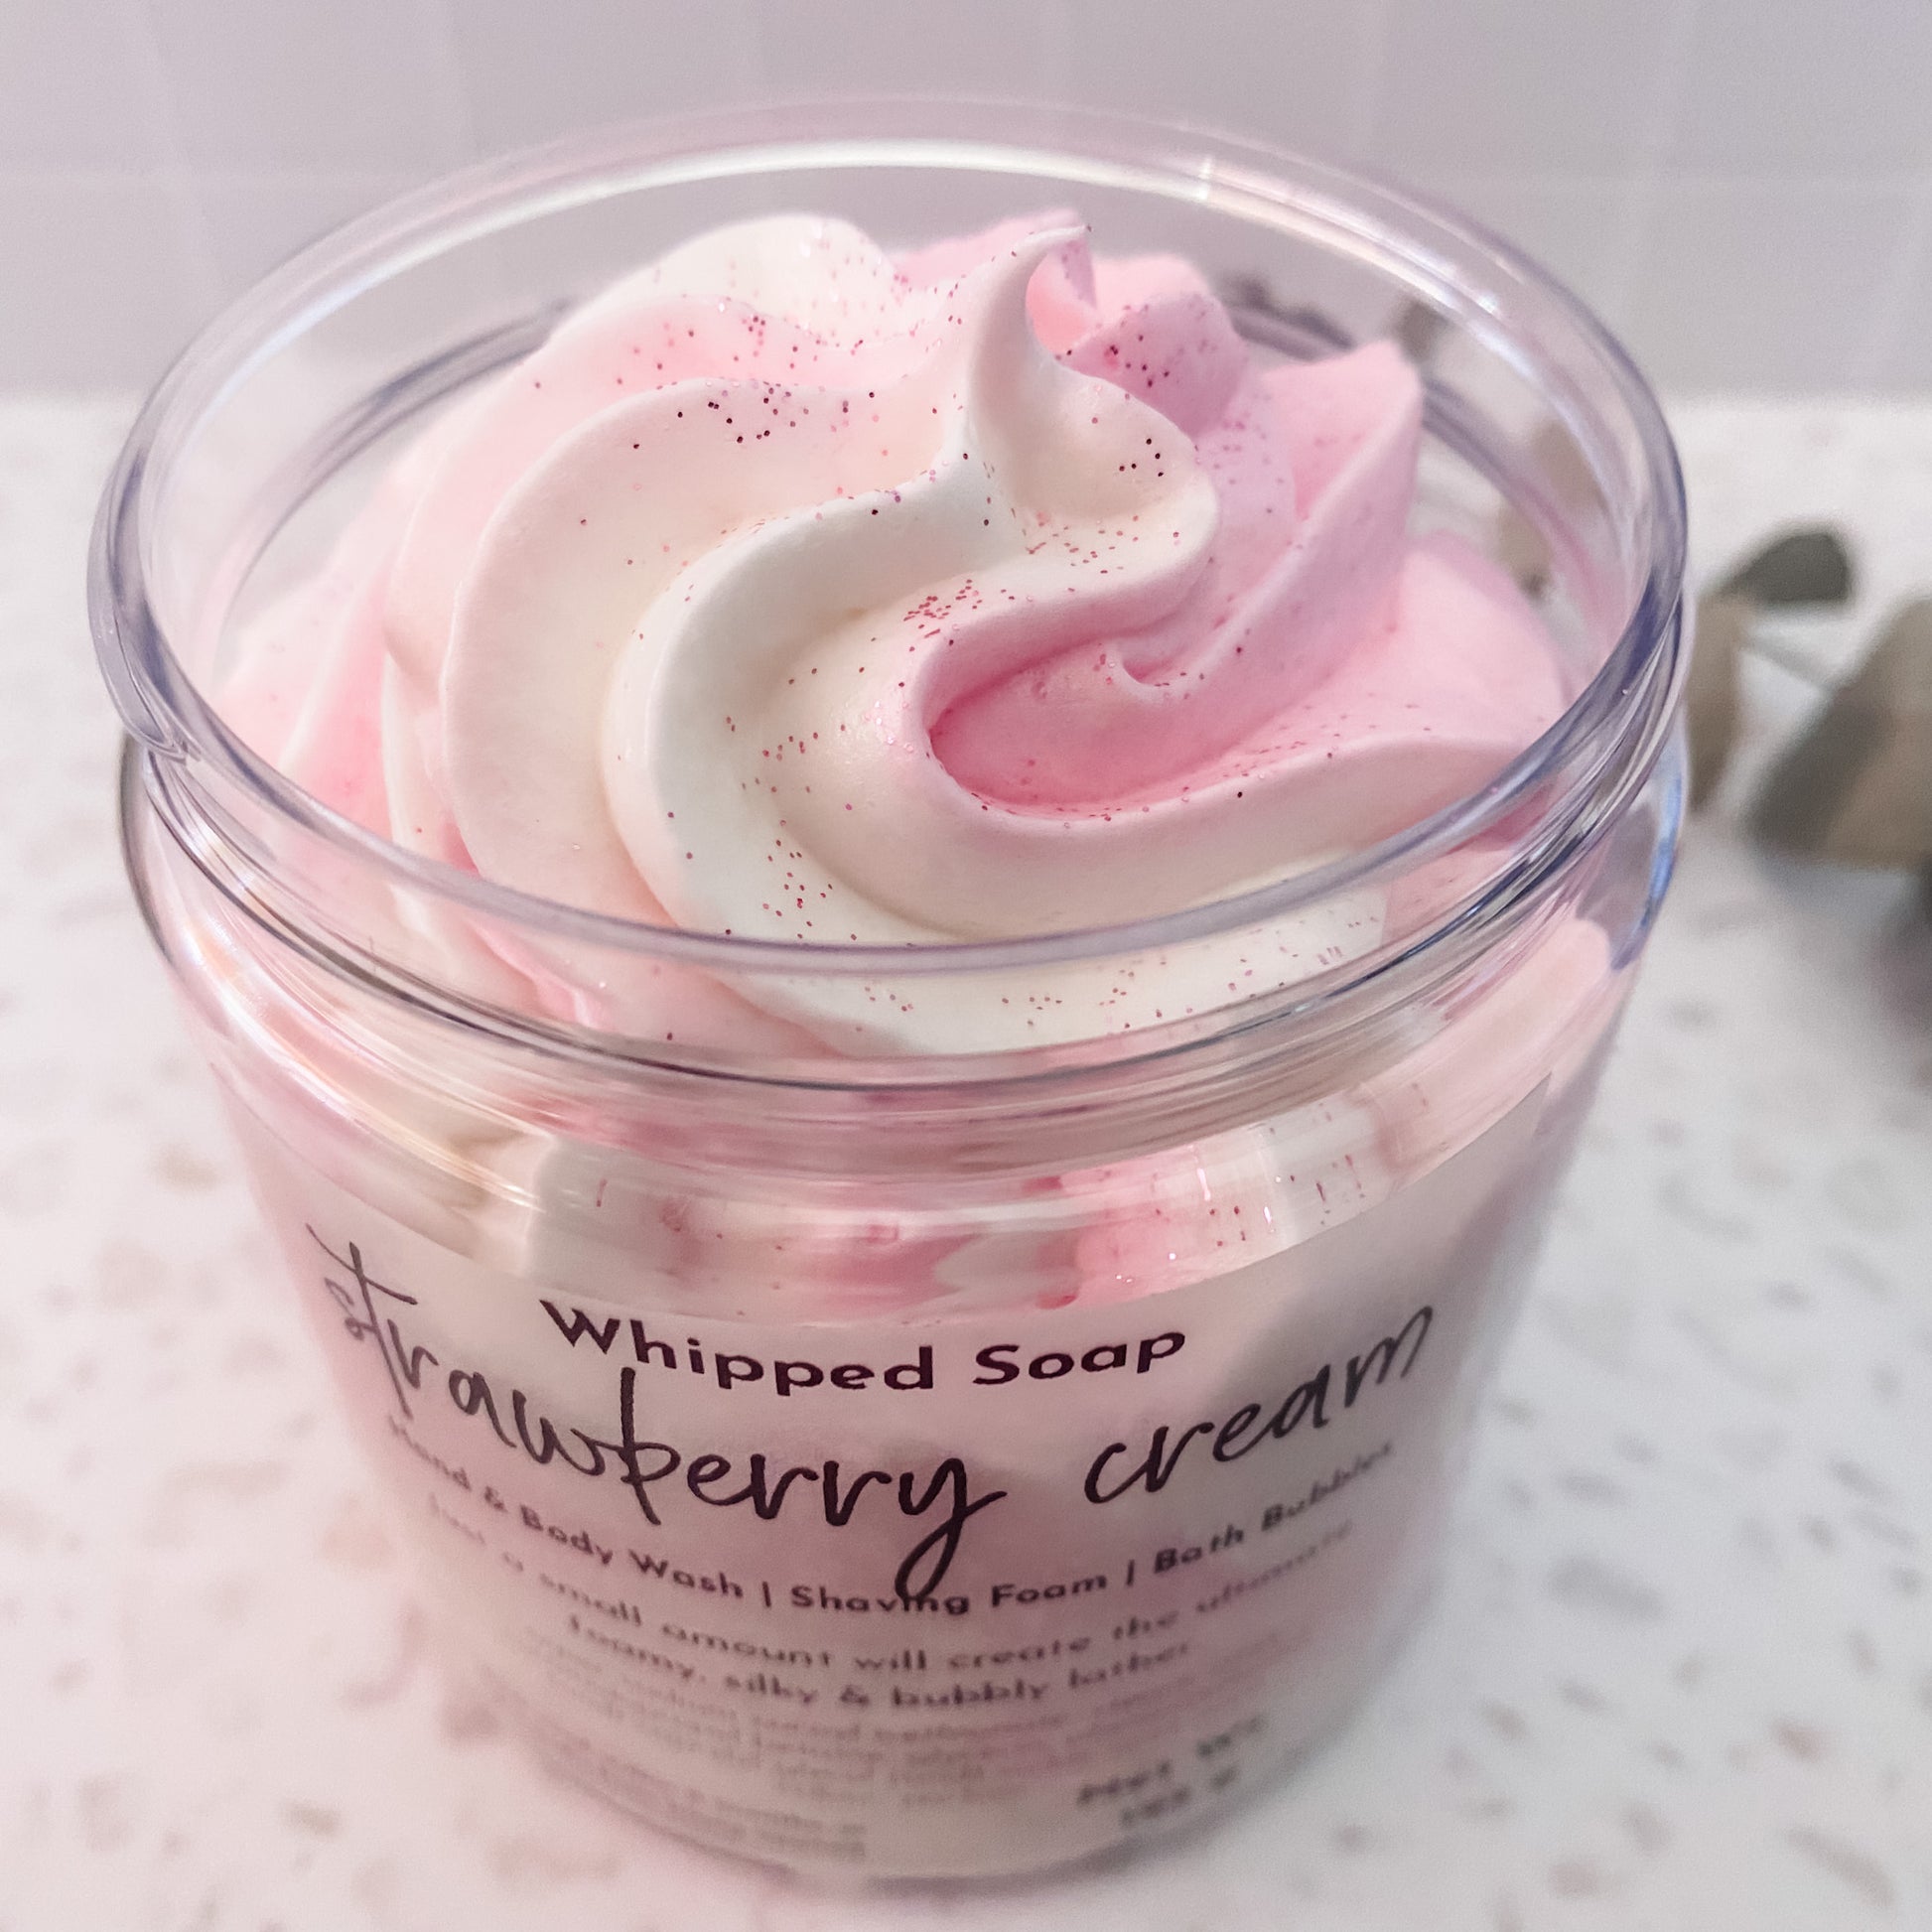 a-single-open-jar-of-handmade-fluffy-whipped-soap